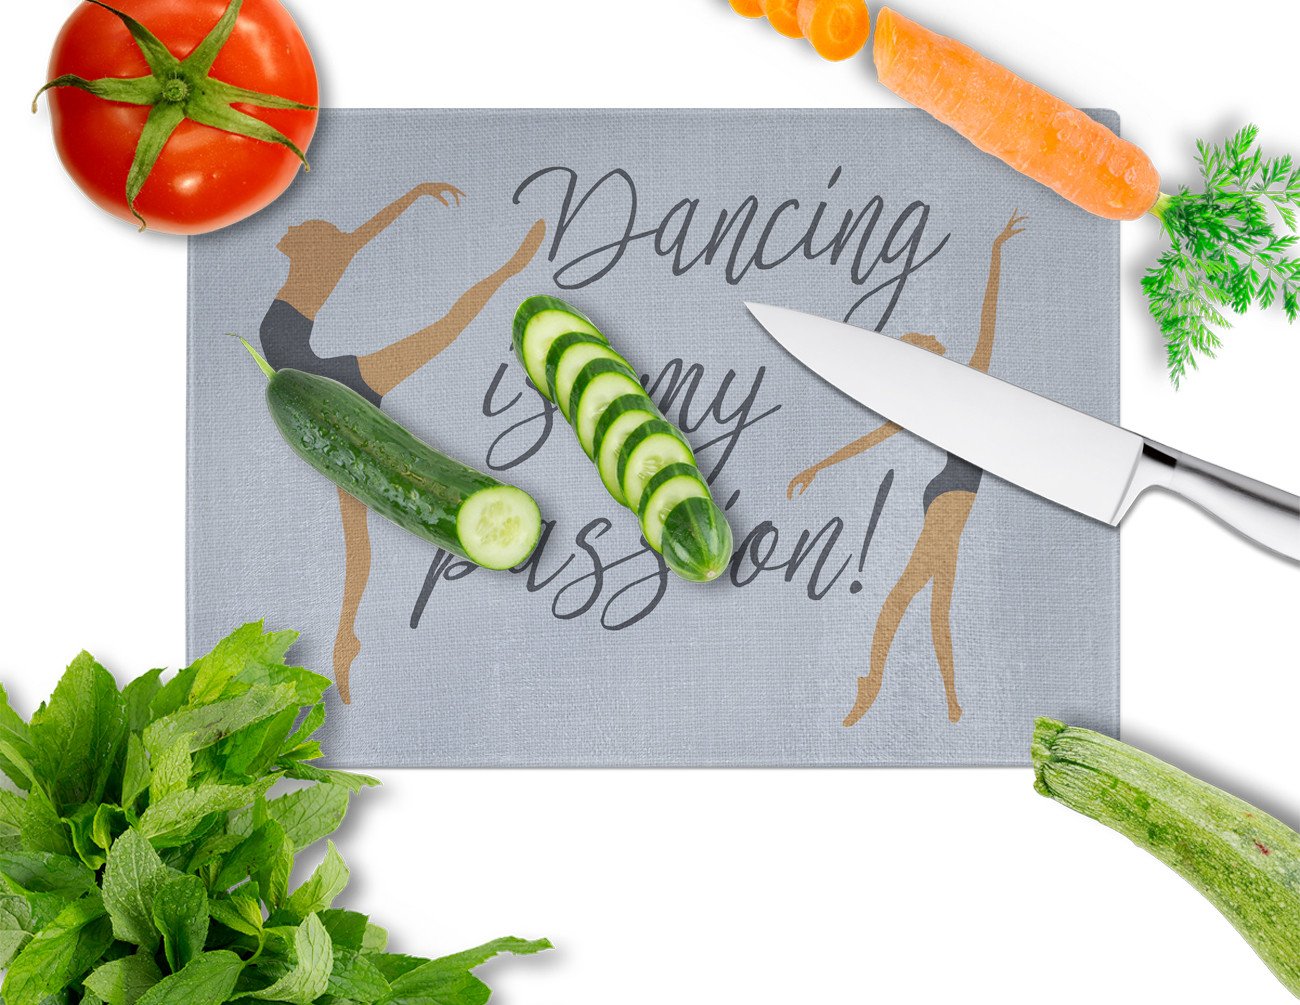 Dancing is My Passion Glass Cutting Board Large BB5381LCB by Caroline's Treasures